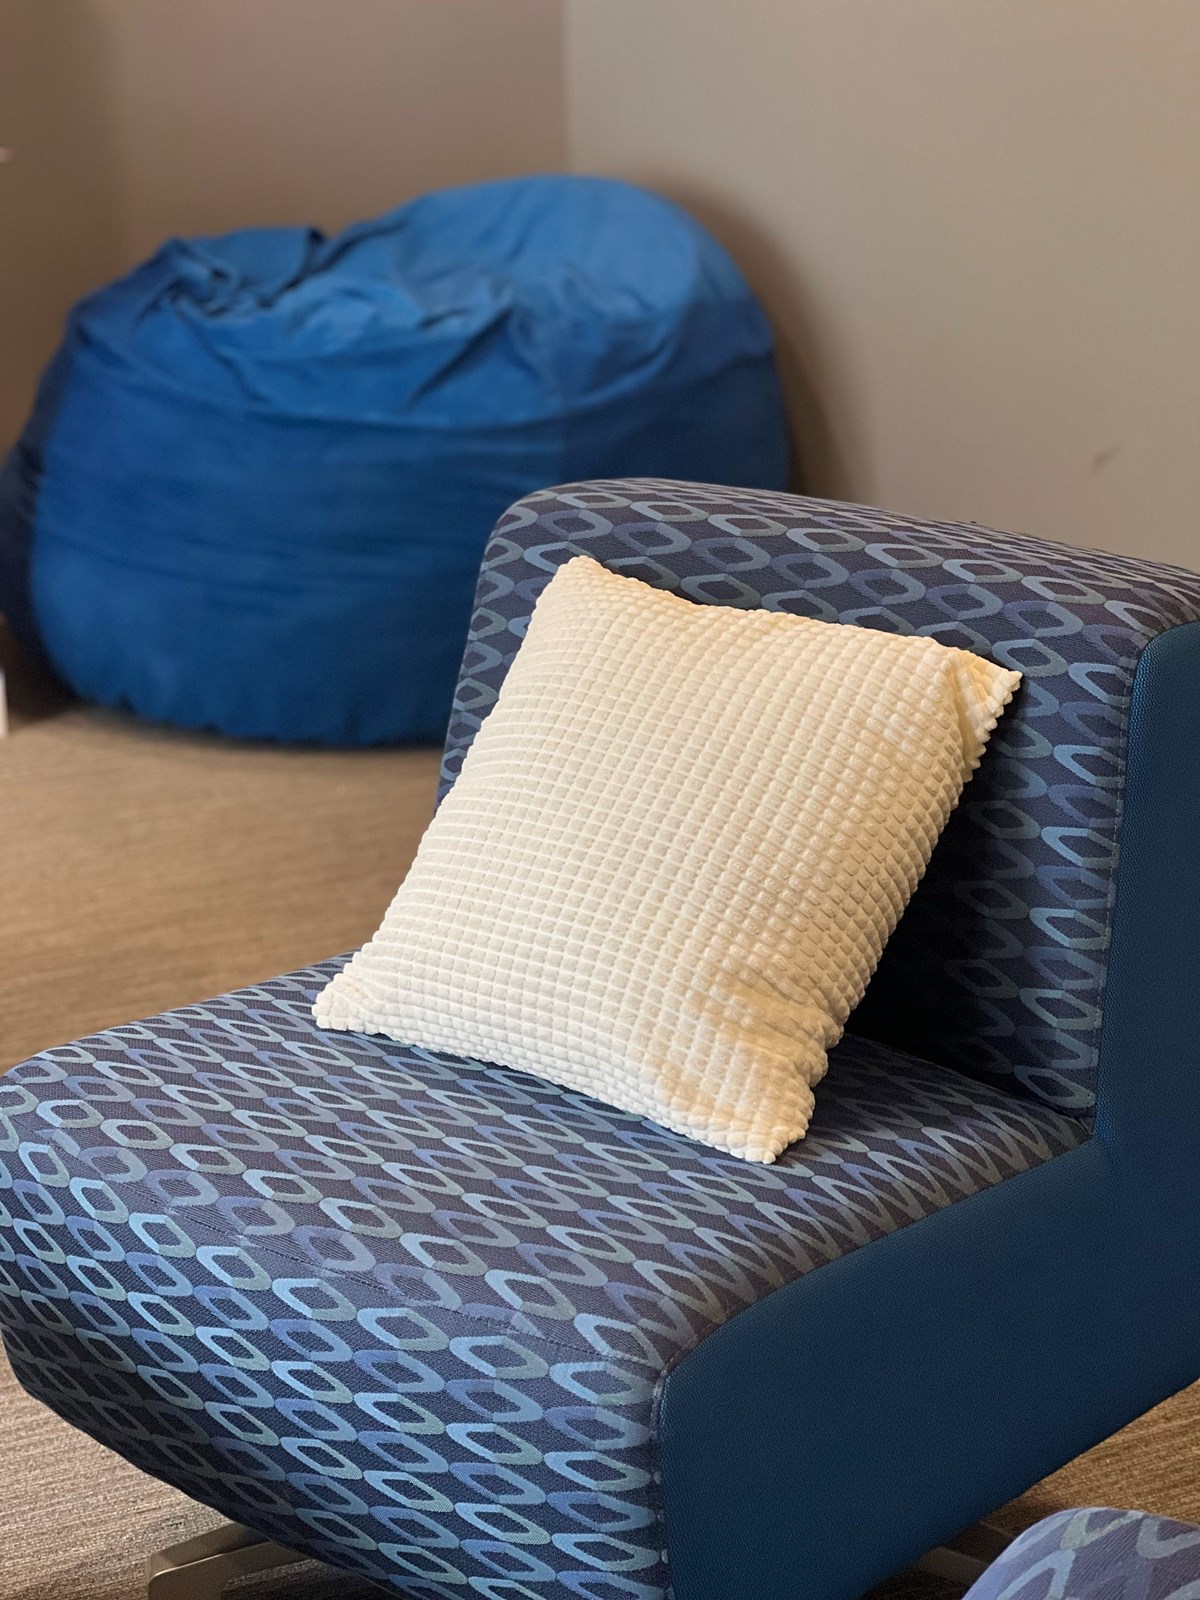 Textured white pillow sitting on patterned lounge chair with a blue bean bag in the background